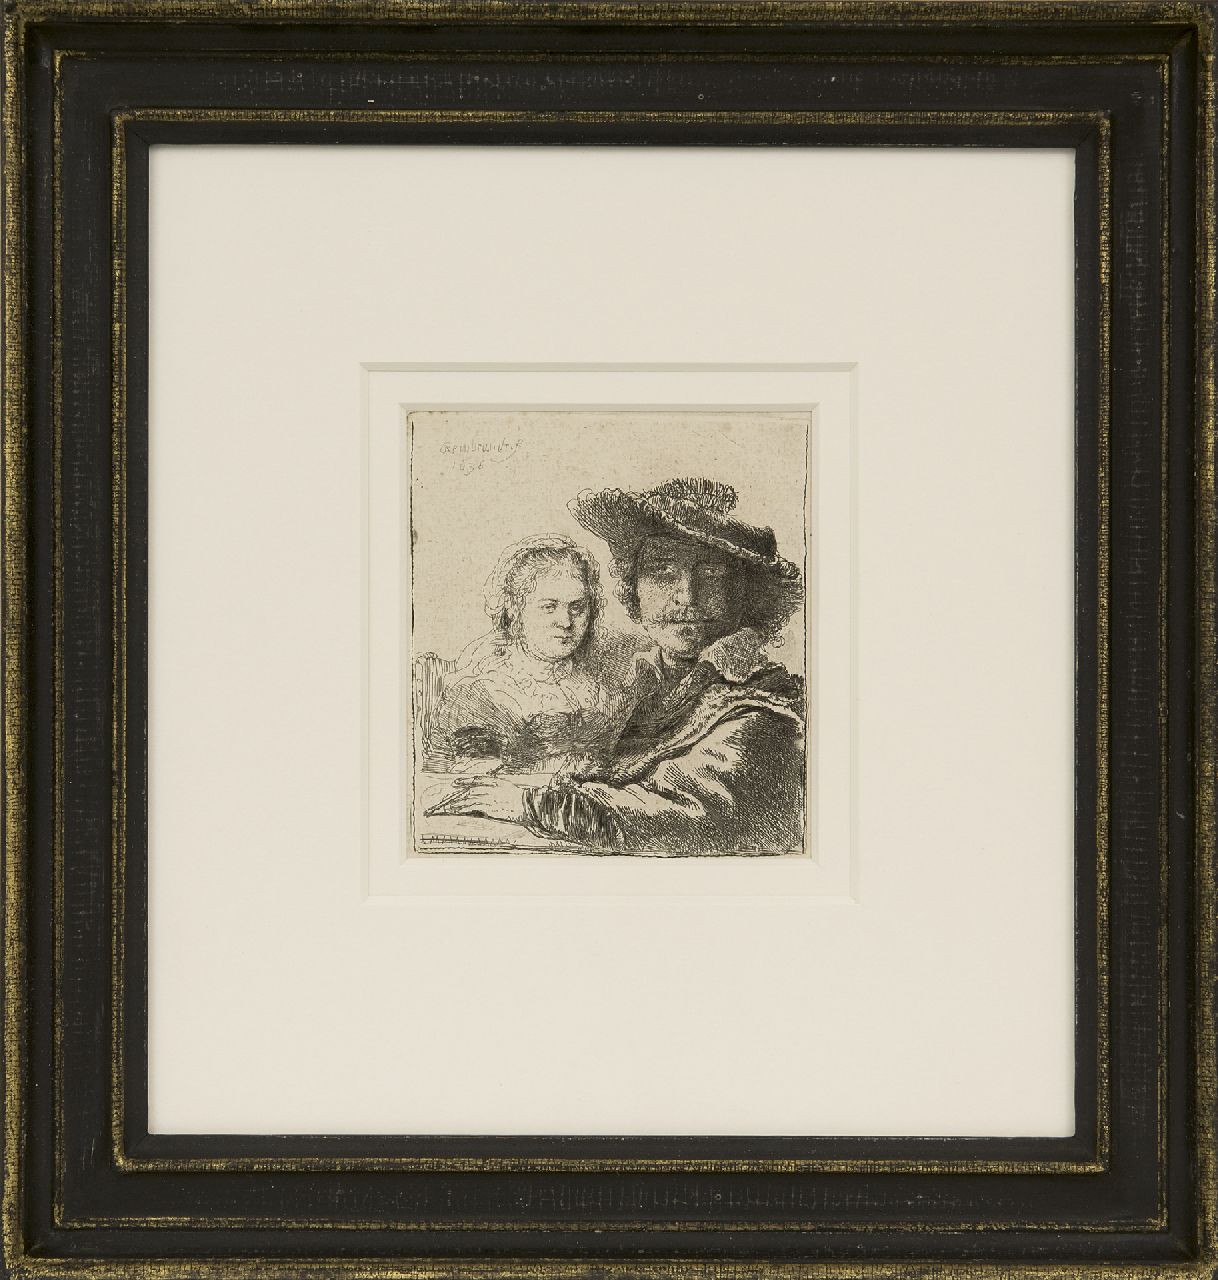 Rembrandt (Rembrandt Harmensz. van Rijn)   | Rembrandt (Rembrandt Harmensz. van Rijn), Selfportrait with Saskia, etching on paper 10.5 x 9.4 cm, signed u.l. in the plate and dated 1636 in the plate